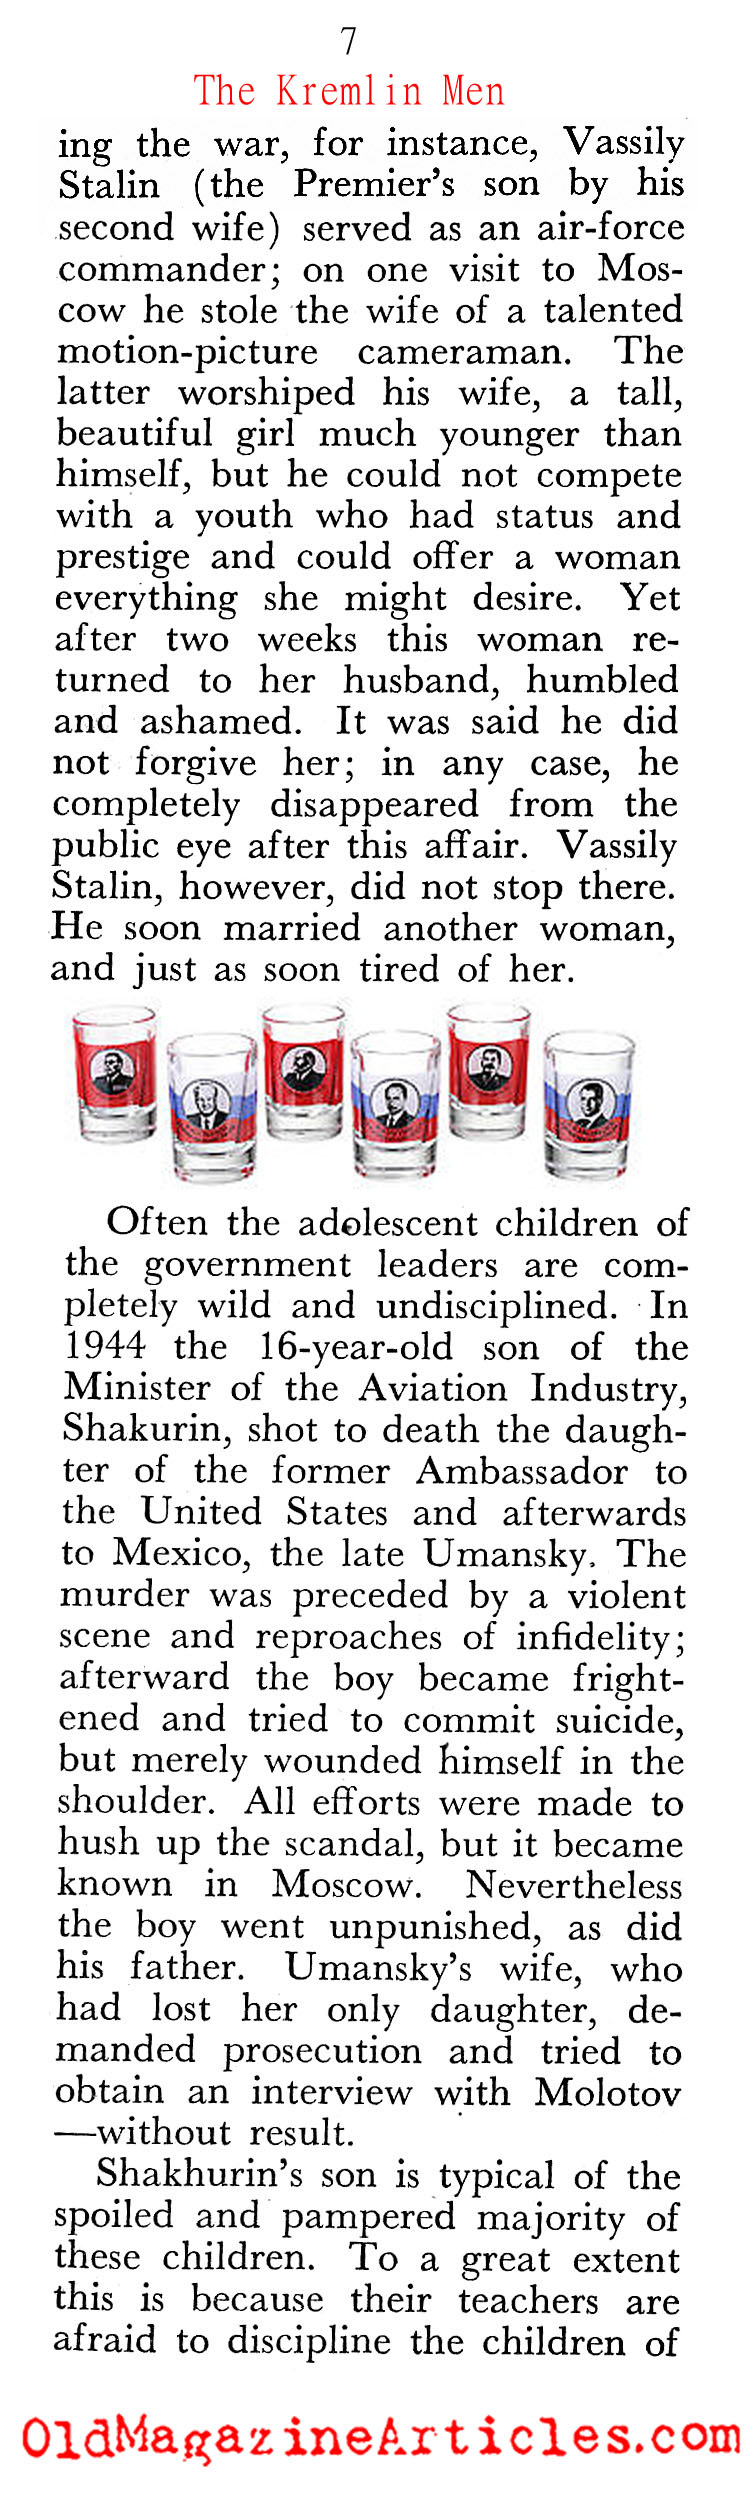 Stalin and His Cronies (Pageant Magazine, 1947) 